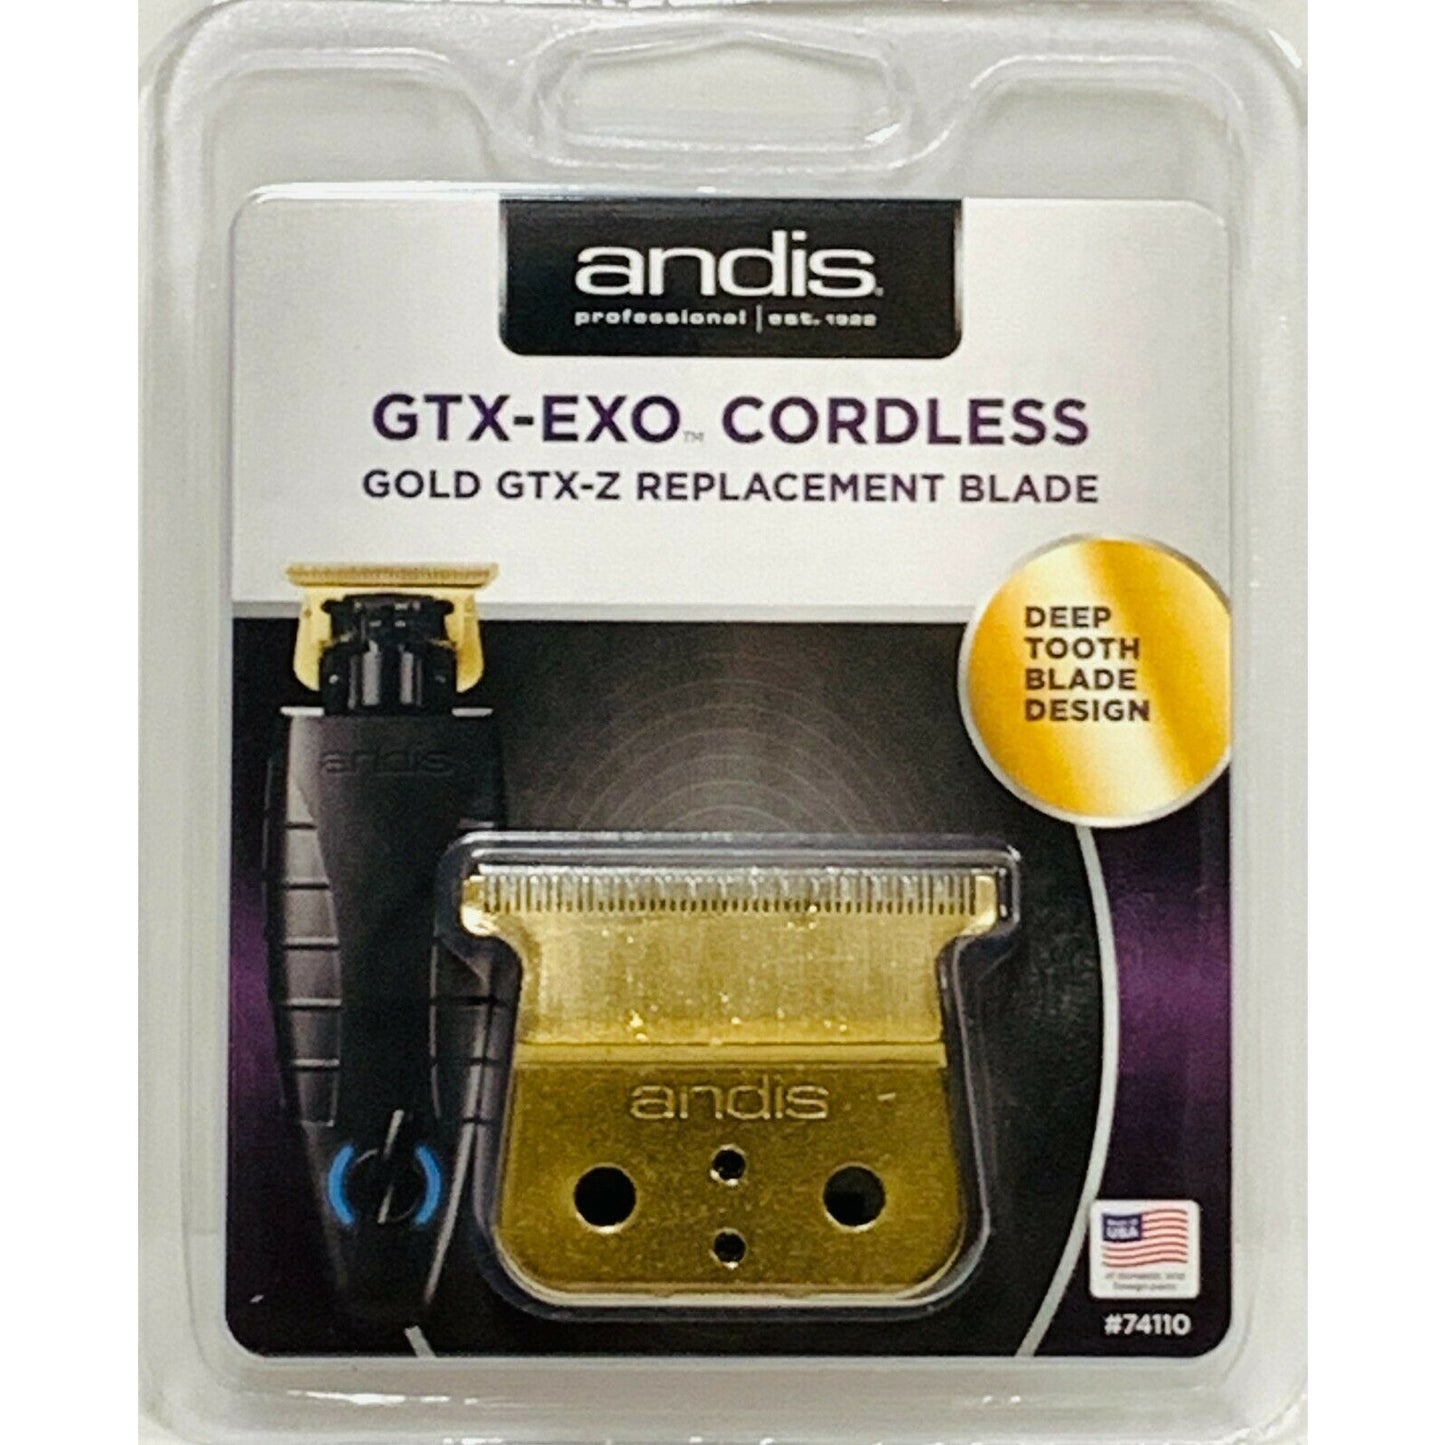 Andis 74110 GTX-EXO Cordless Gold GTX-Z Replacement Blade Fits Model ORL-S